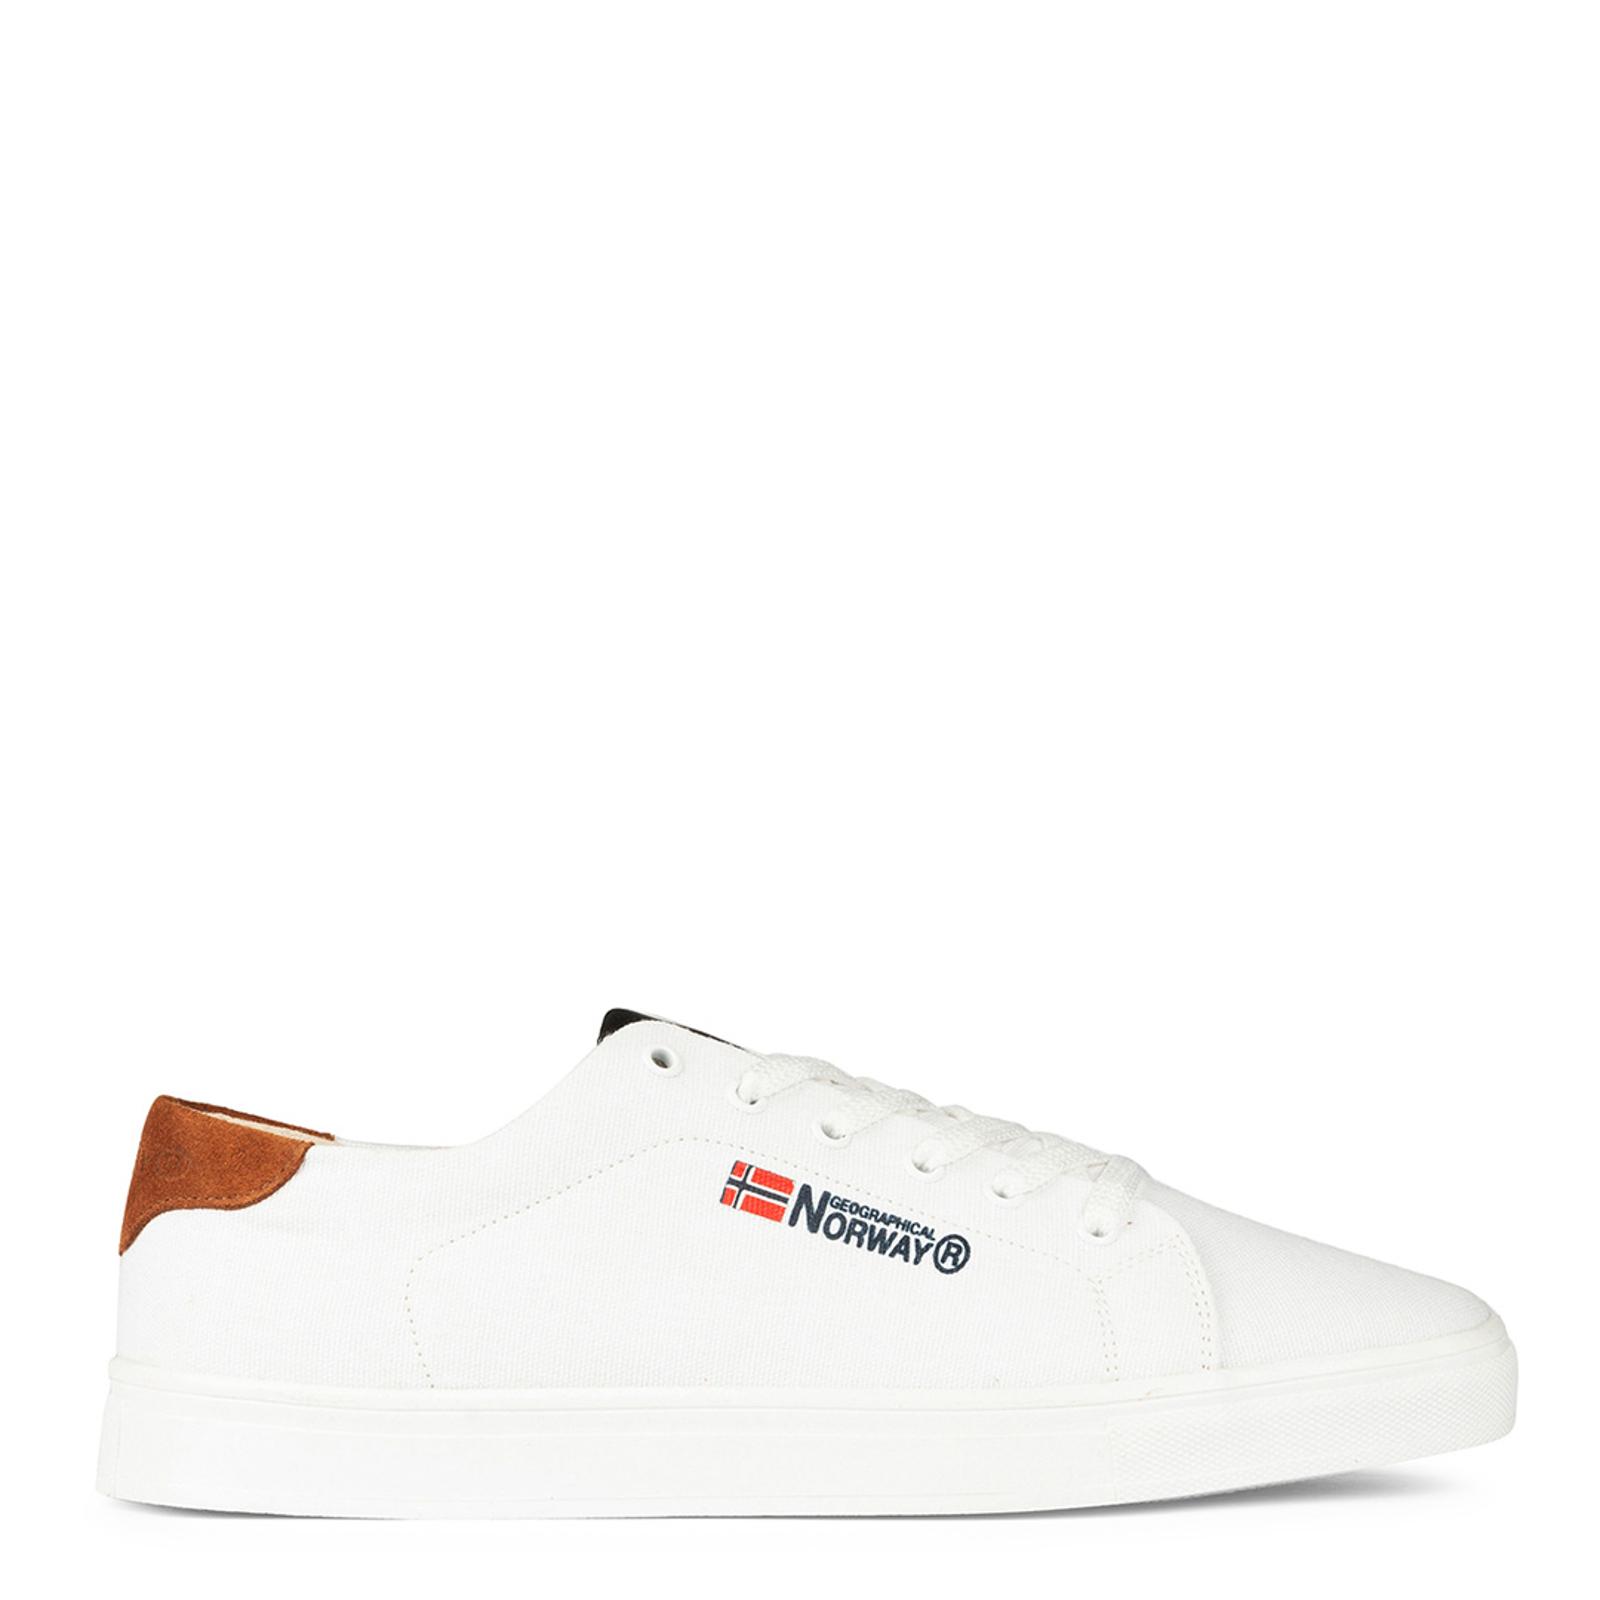 White Canvas Tennis Style Sneakers - BrandAlley